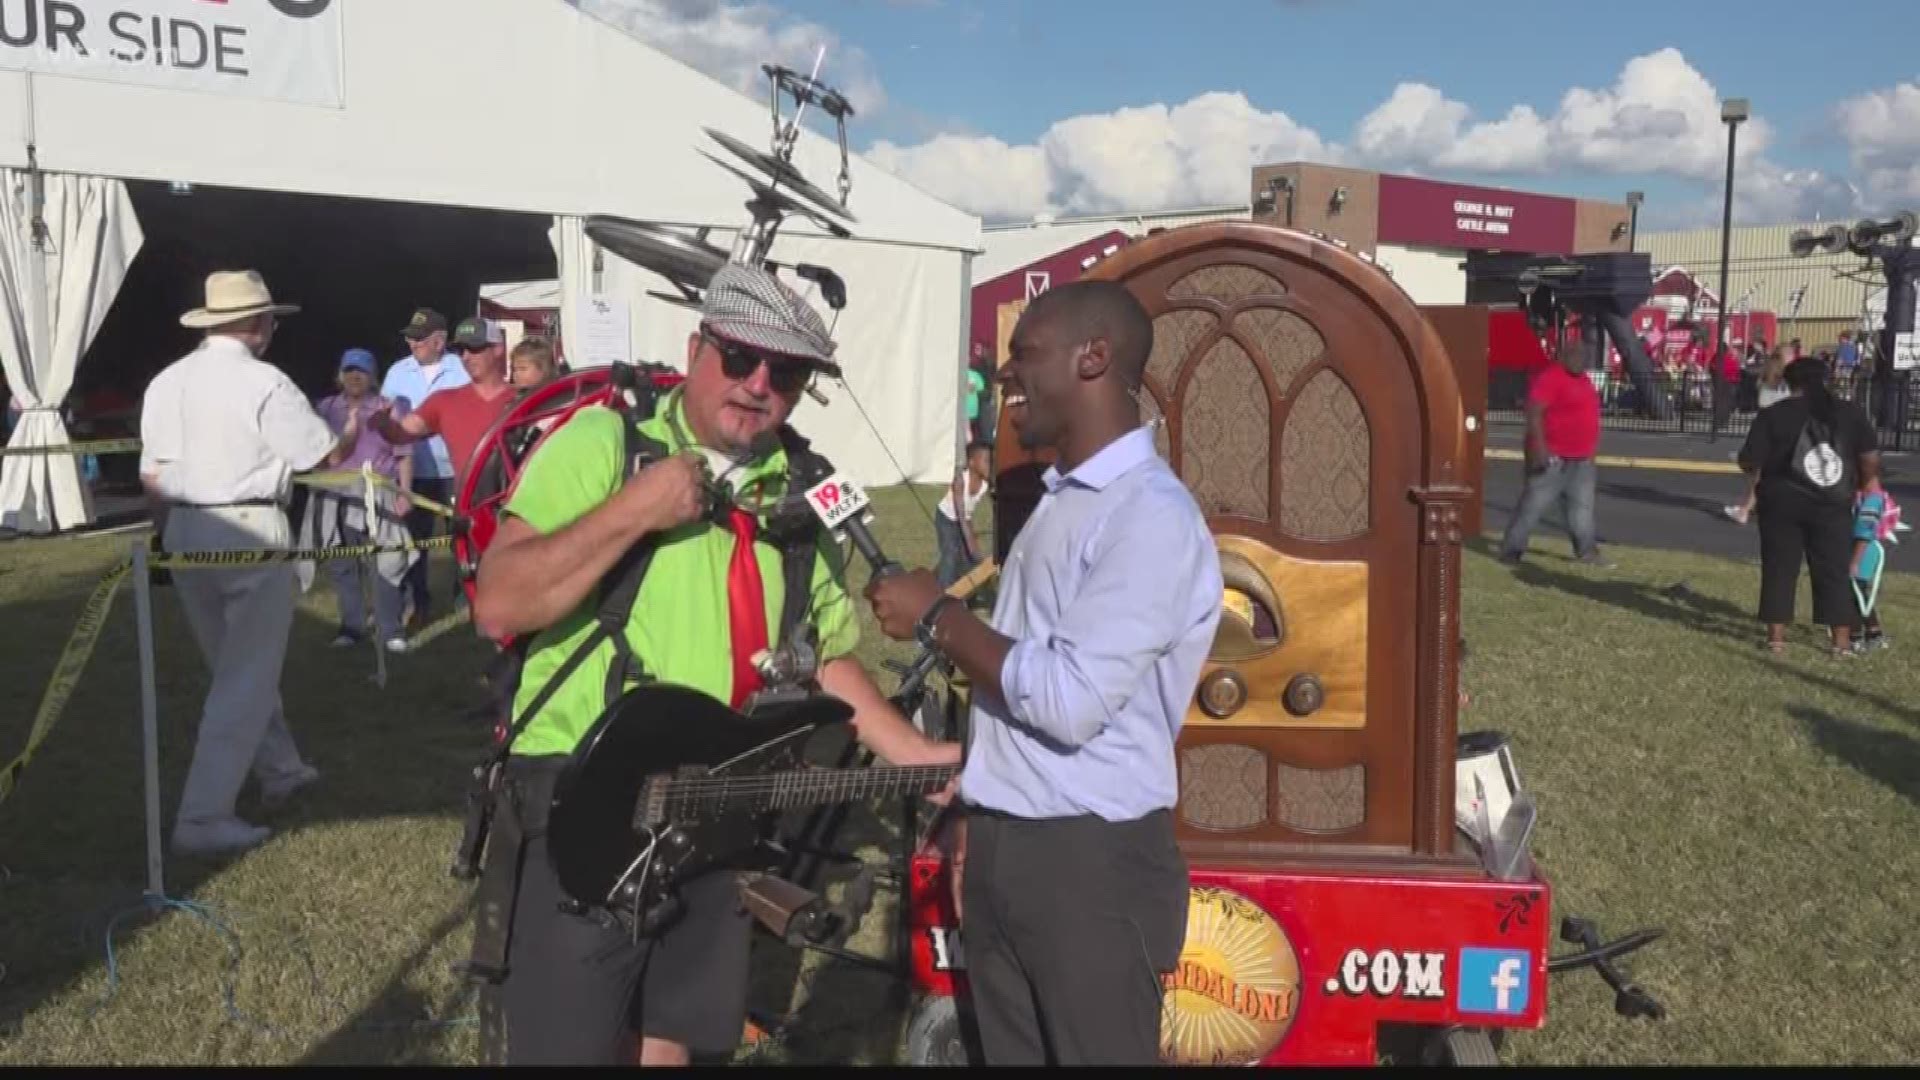 From food to games, there's fun and attractions for everybody.  News19's Michael Fuller reports from the SC State Fair.